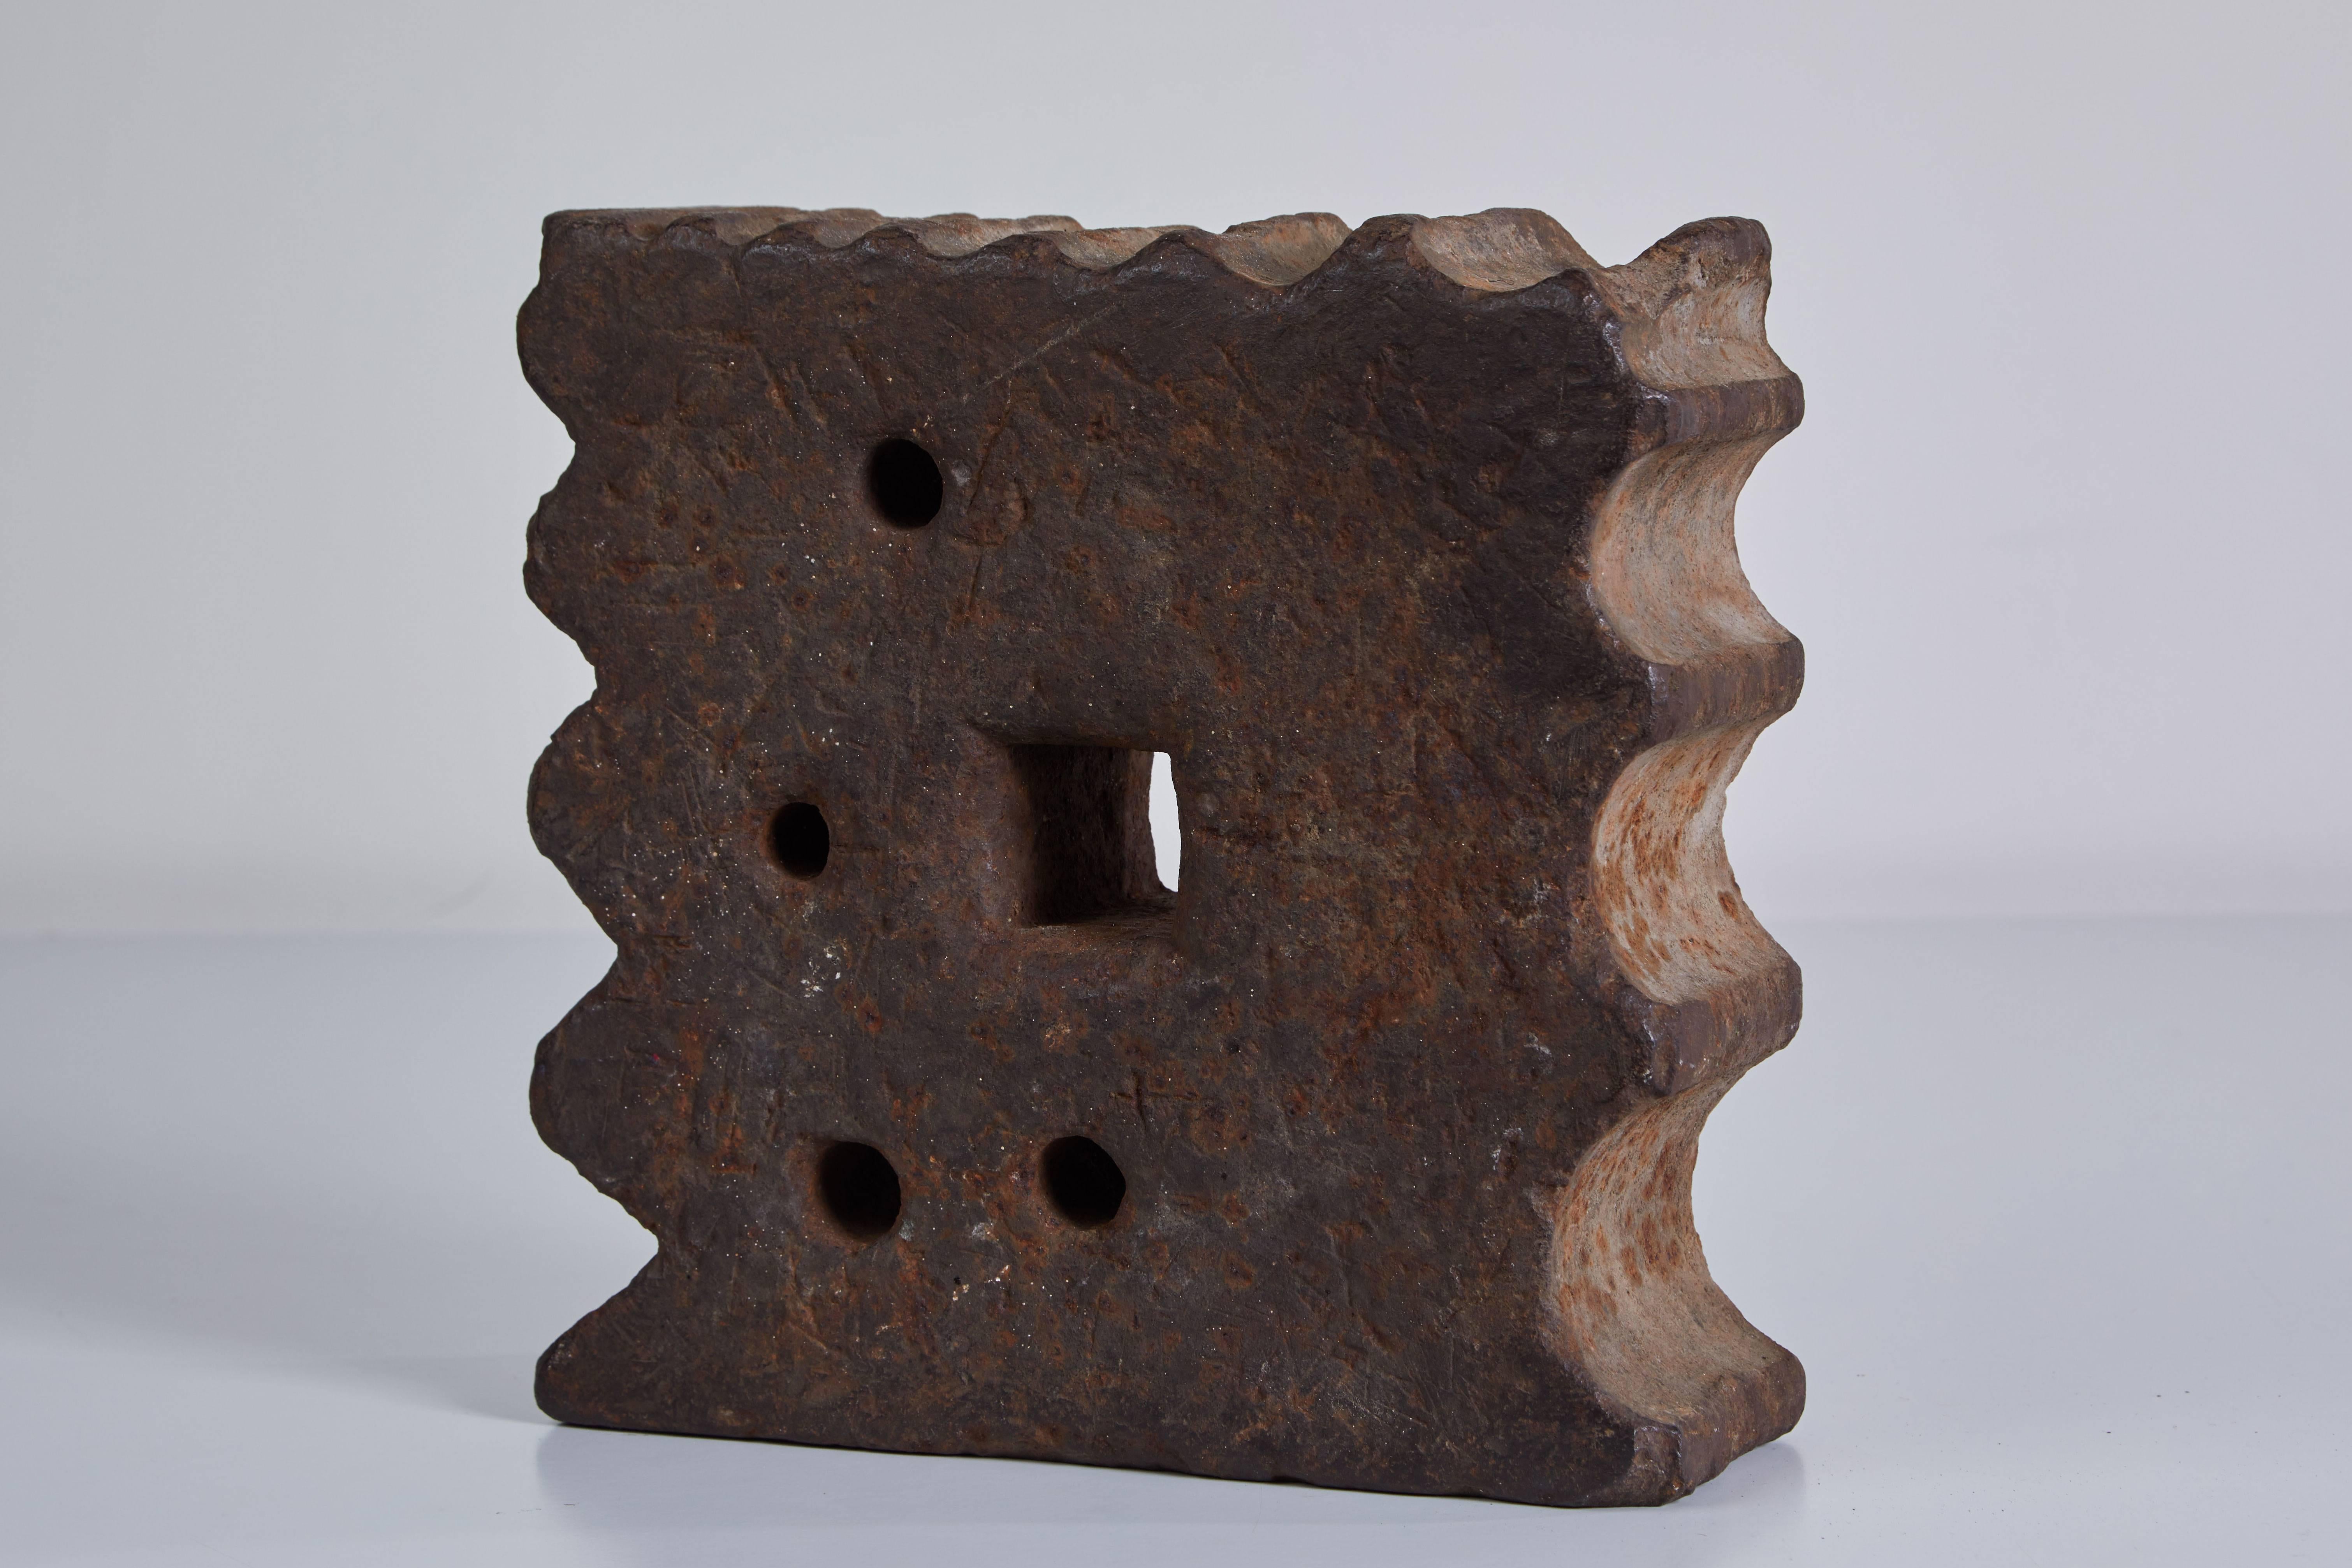 Sculptural cast iron Industrial swage block used by blacksmiths machinists for shaping iron. Made in USA, circa 1920s.